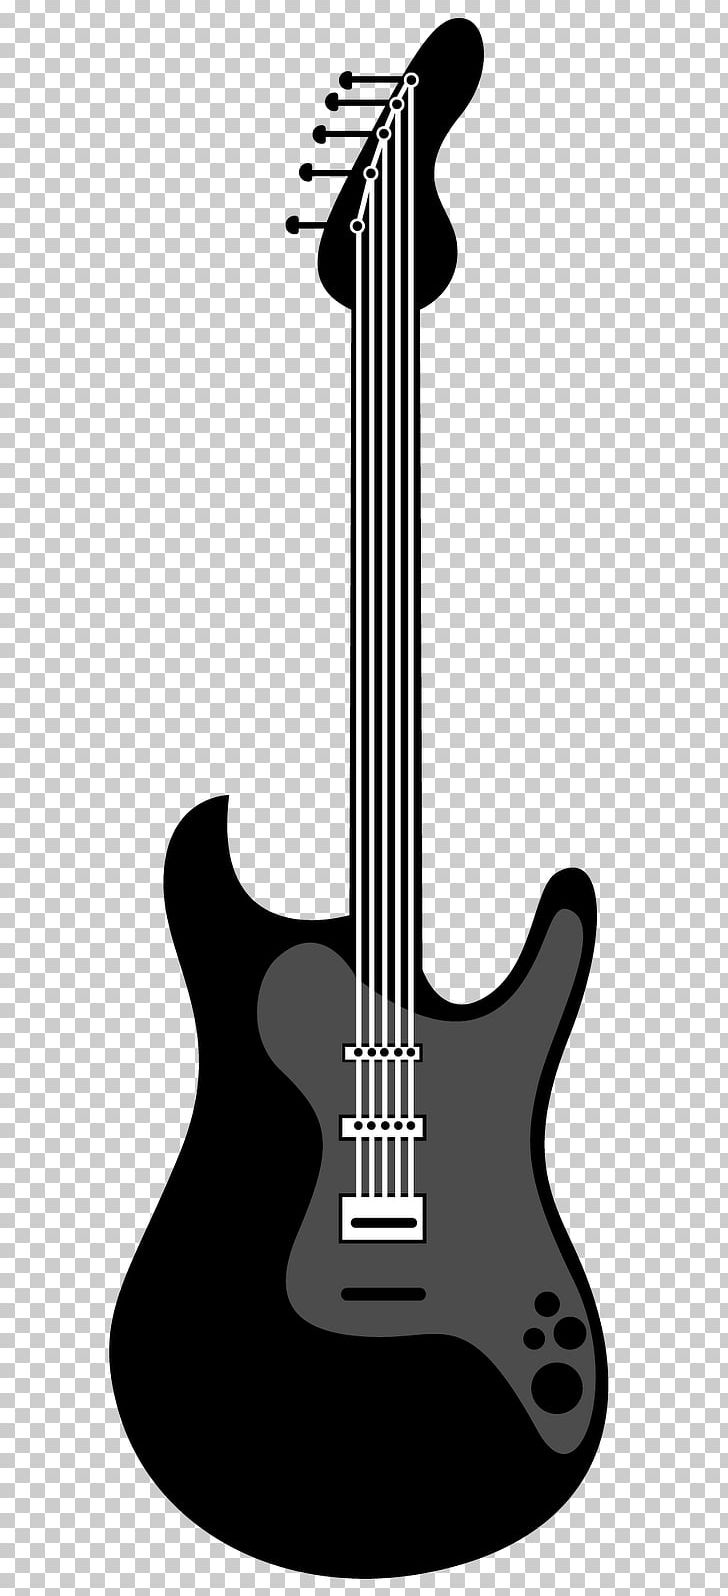 Electric Guitar String Instruments Musical Instruments Acoustic Guitar PNG, Clipart, Acoustic Electric Guitar, Classical Guitar, Guitar, Music, Musical Instrument Free PNG Download